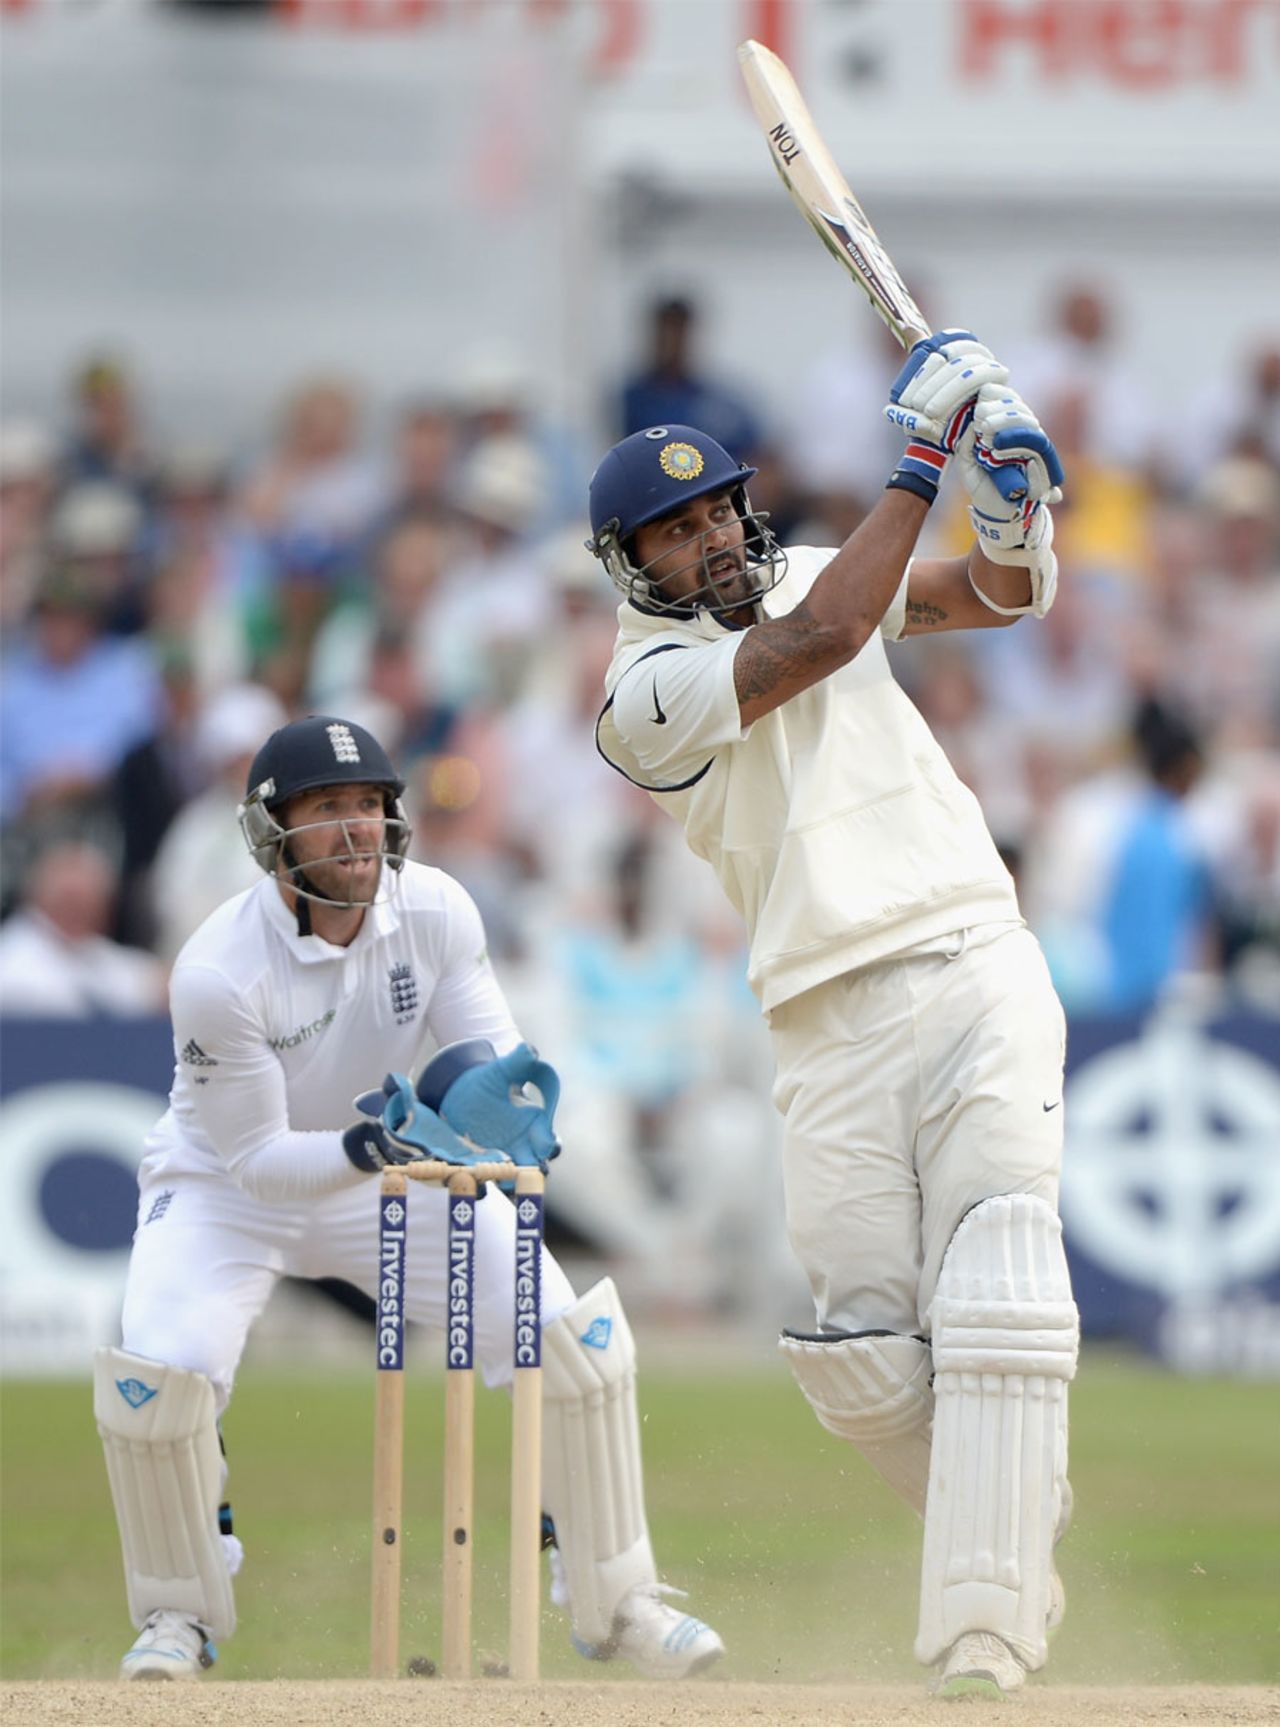 M Vijay stroked his second fifty-plus score of the match, England v India, 1st Investec Test, Trent Bridge, 4th day, July 12, 2014